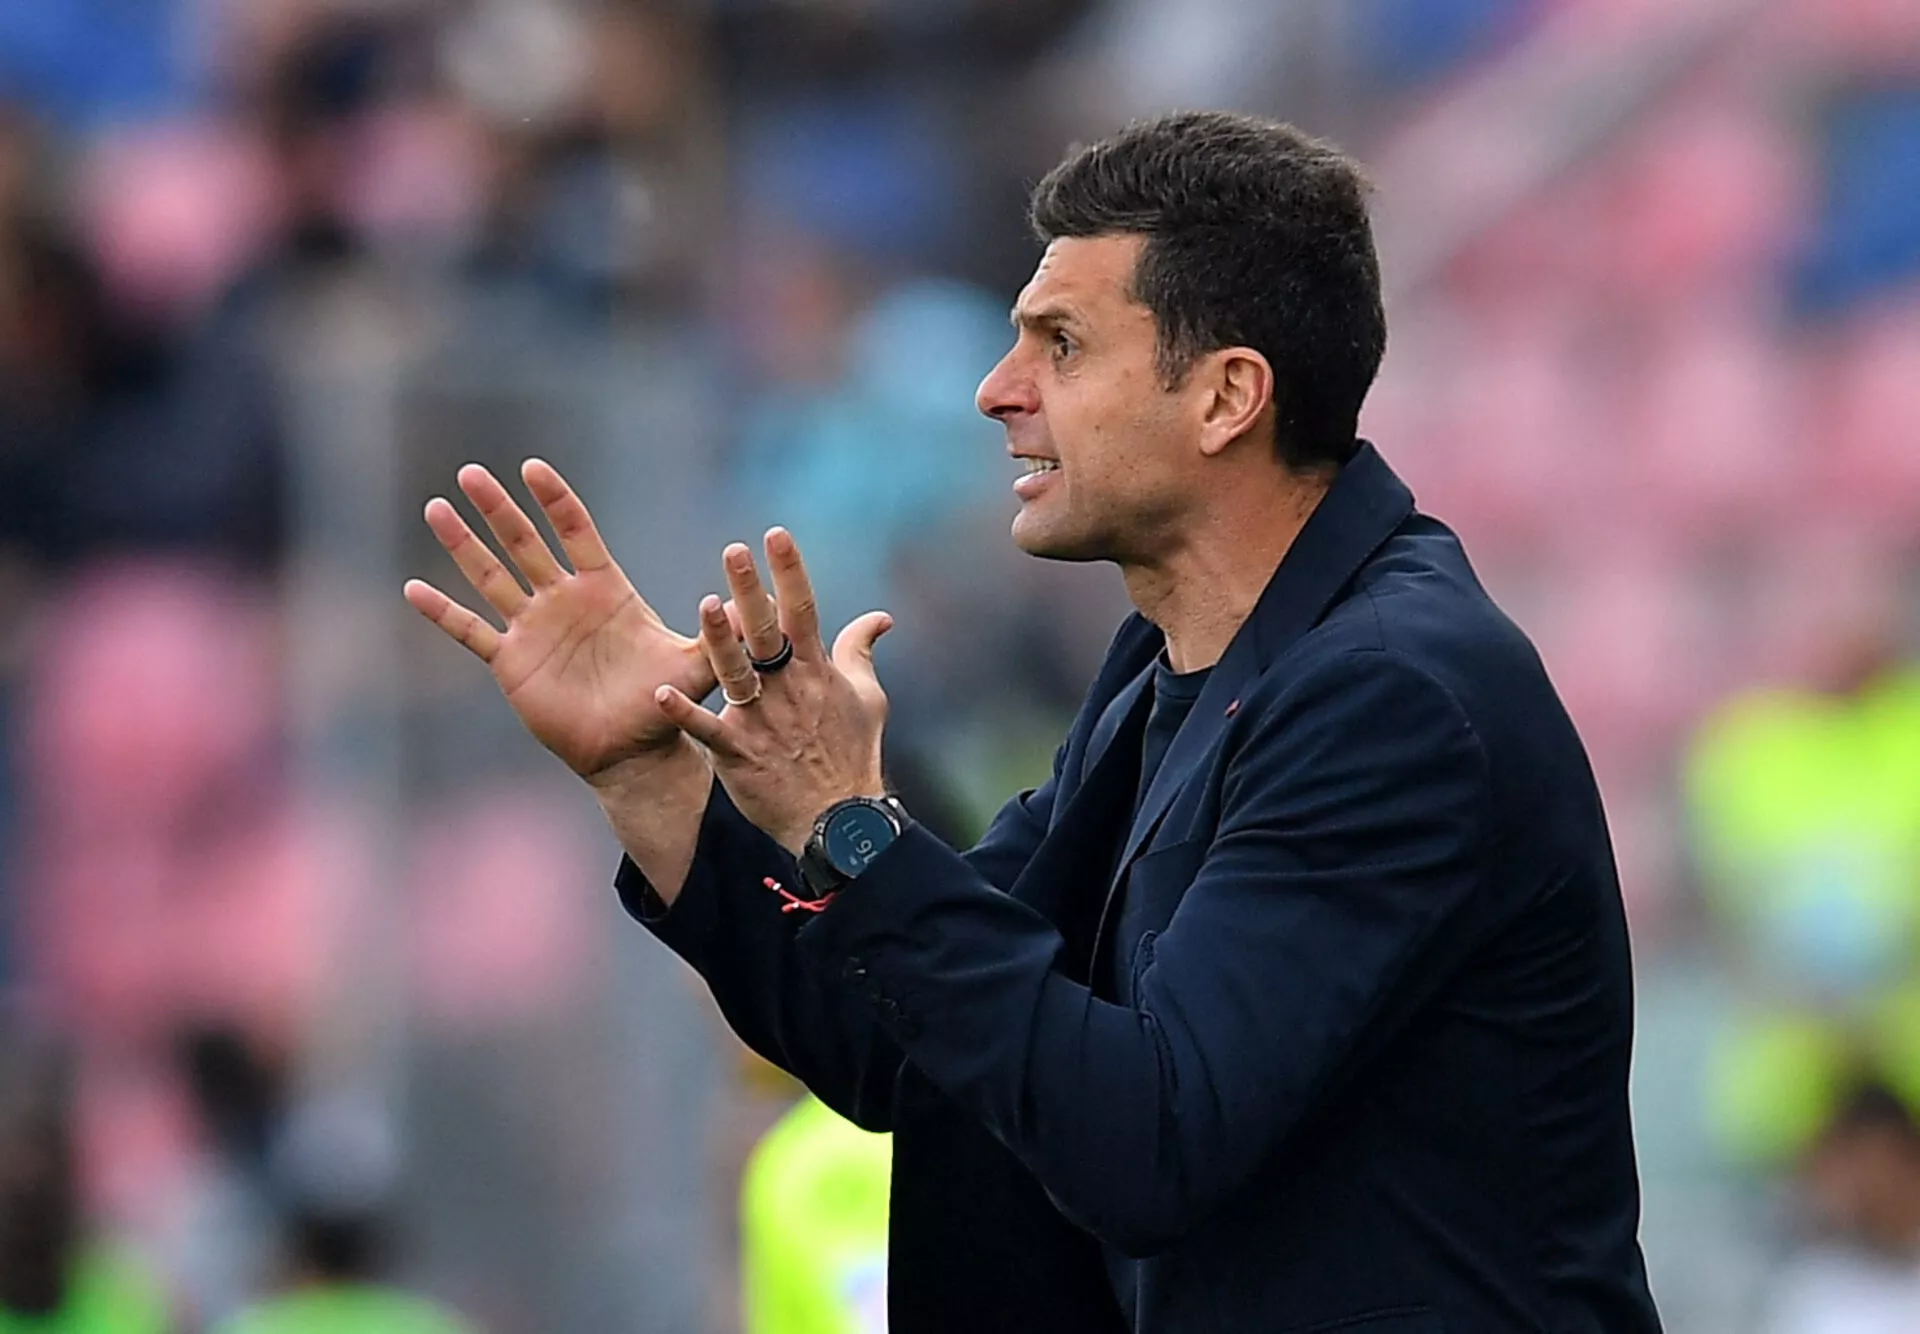 A last-ditch effort from Bologna didn’t make Thiago Motta change his mind. The team announced Thursday that the gaffer wouldn’t extend his contract.